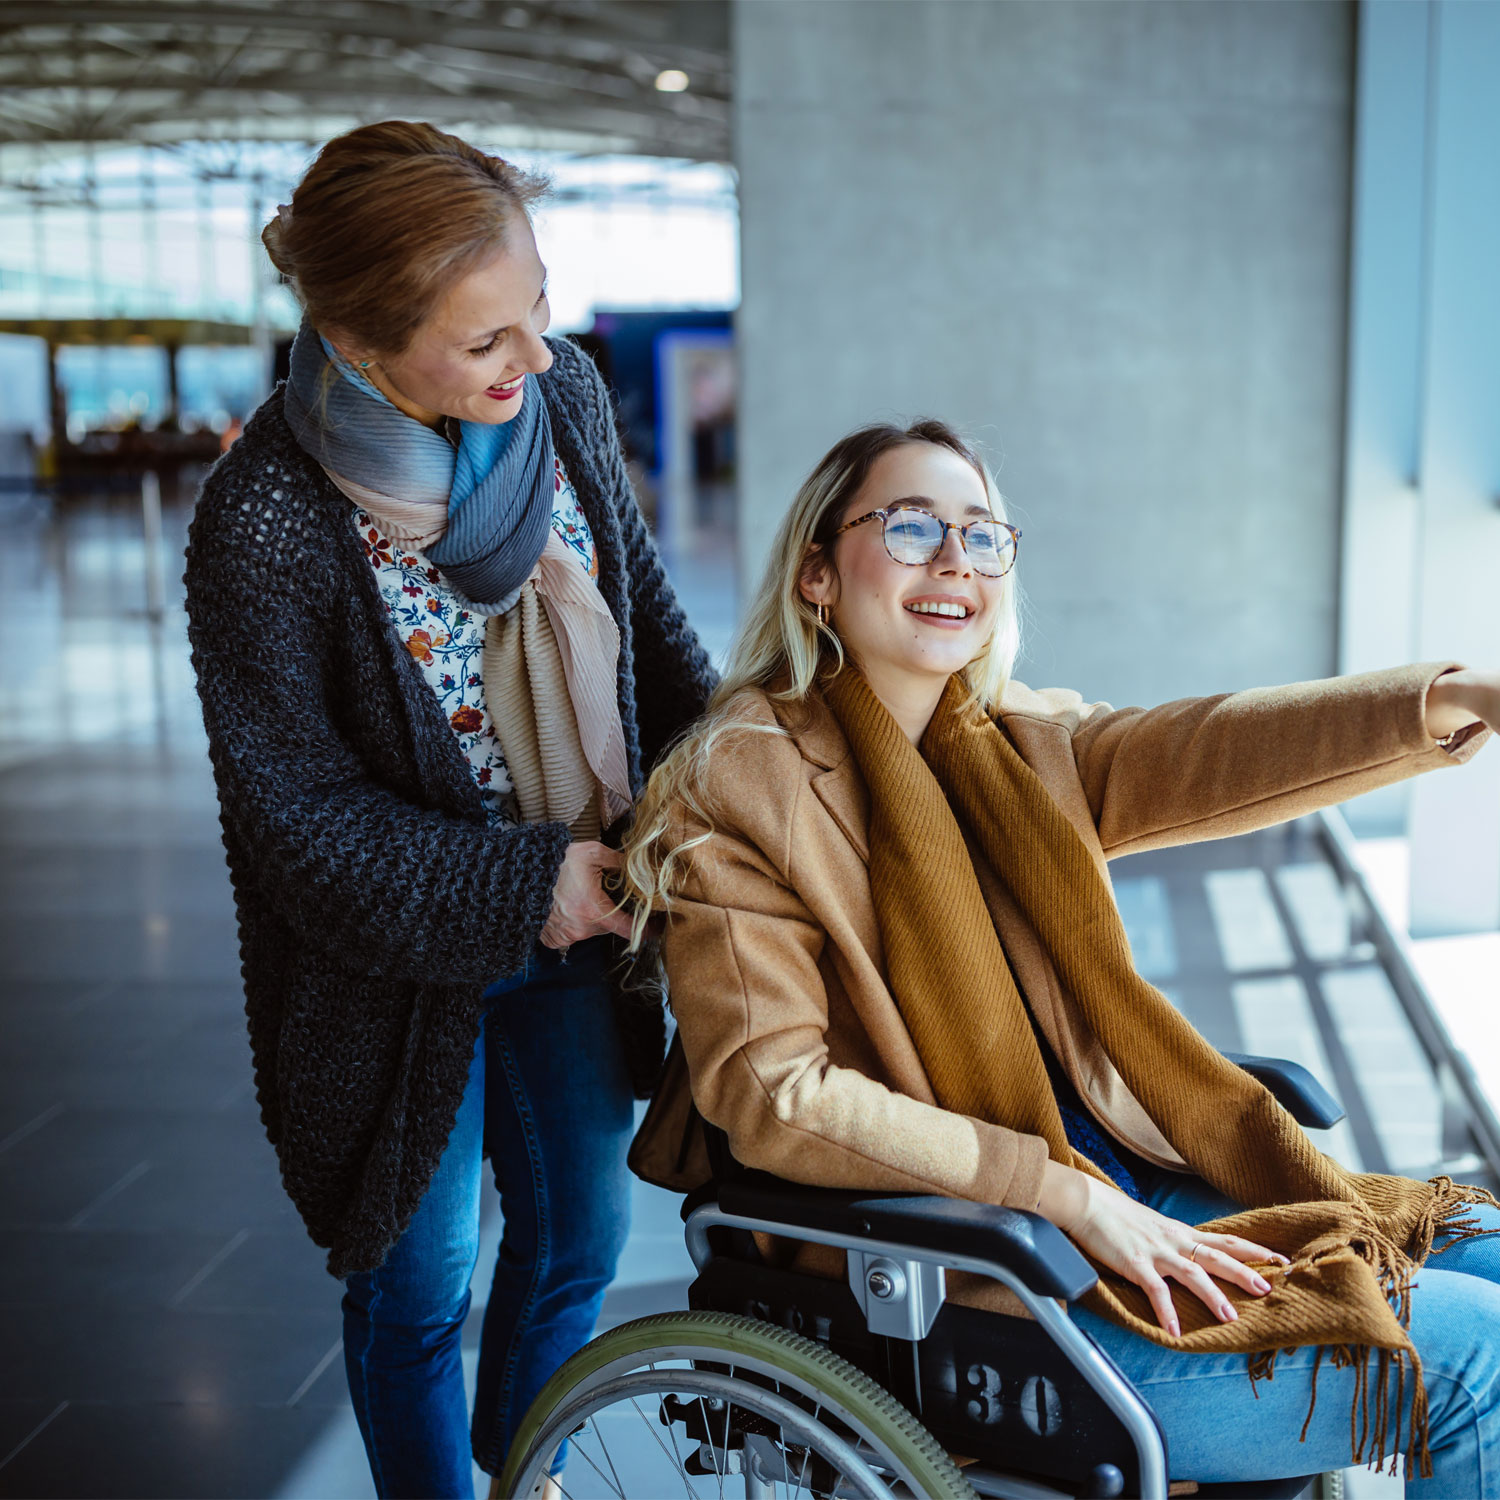 What to consider when travelling as a wheelchair user